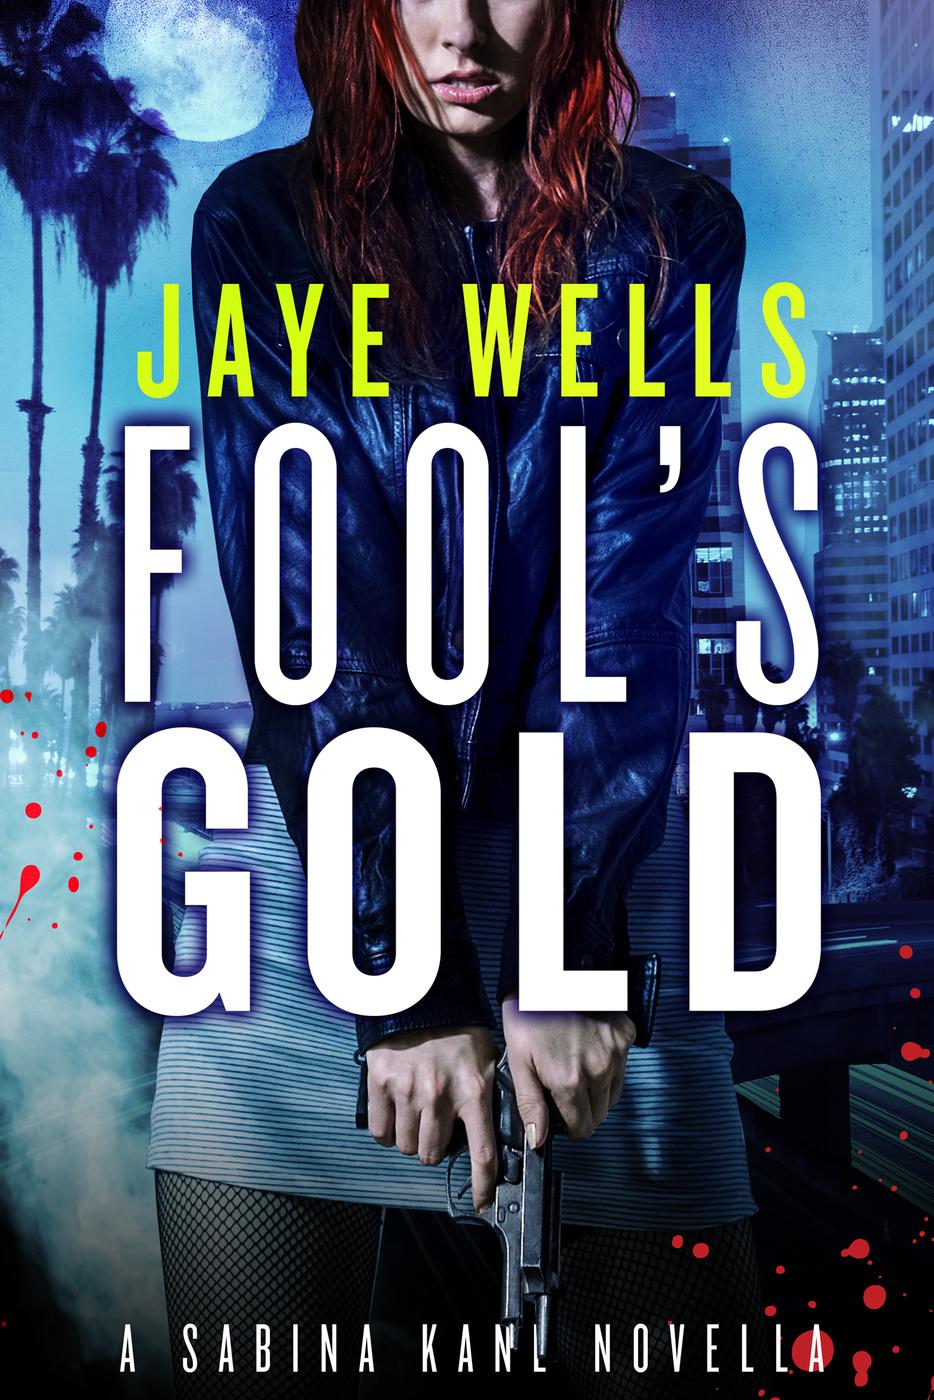 Fool's Gold (2014) by Jaye Wells